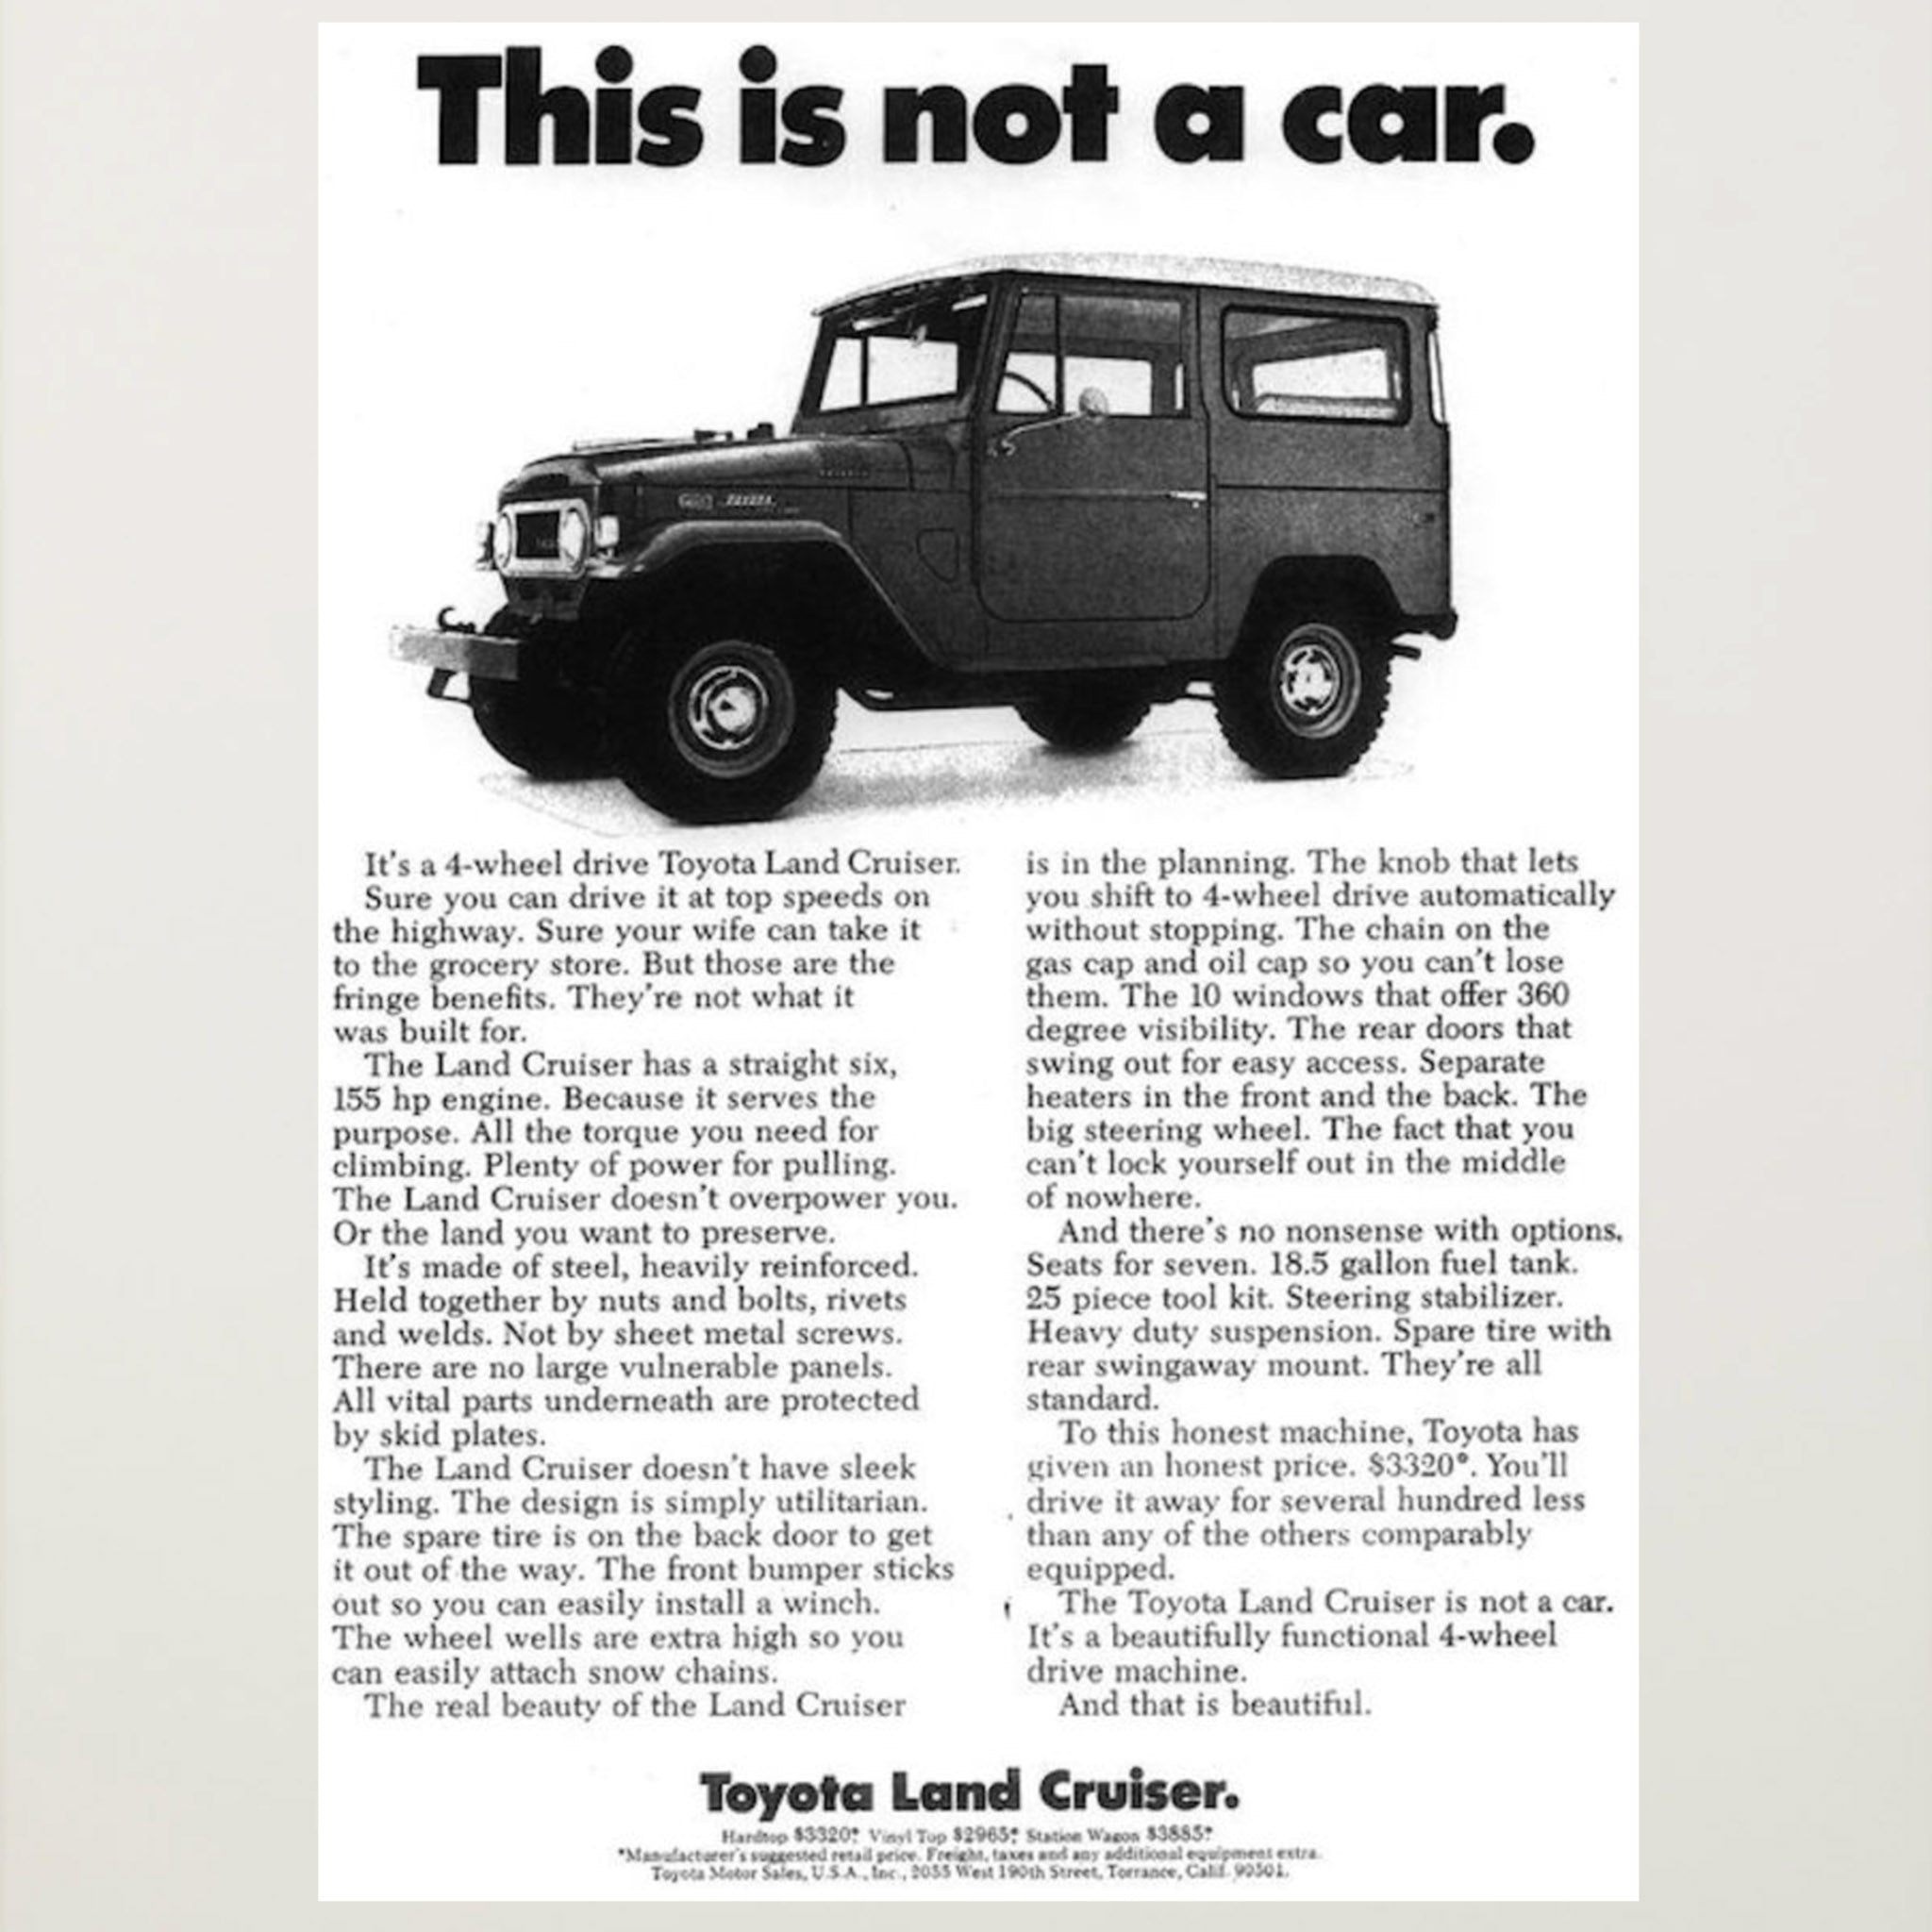 Framed Toyota Land Cruiser This is Not a Car Advertisement